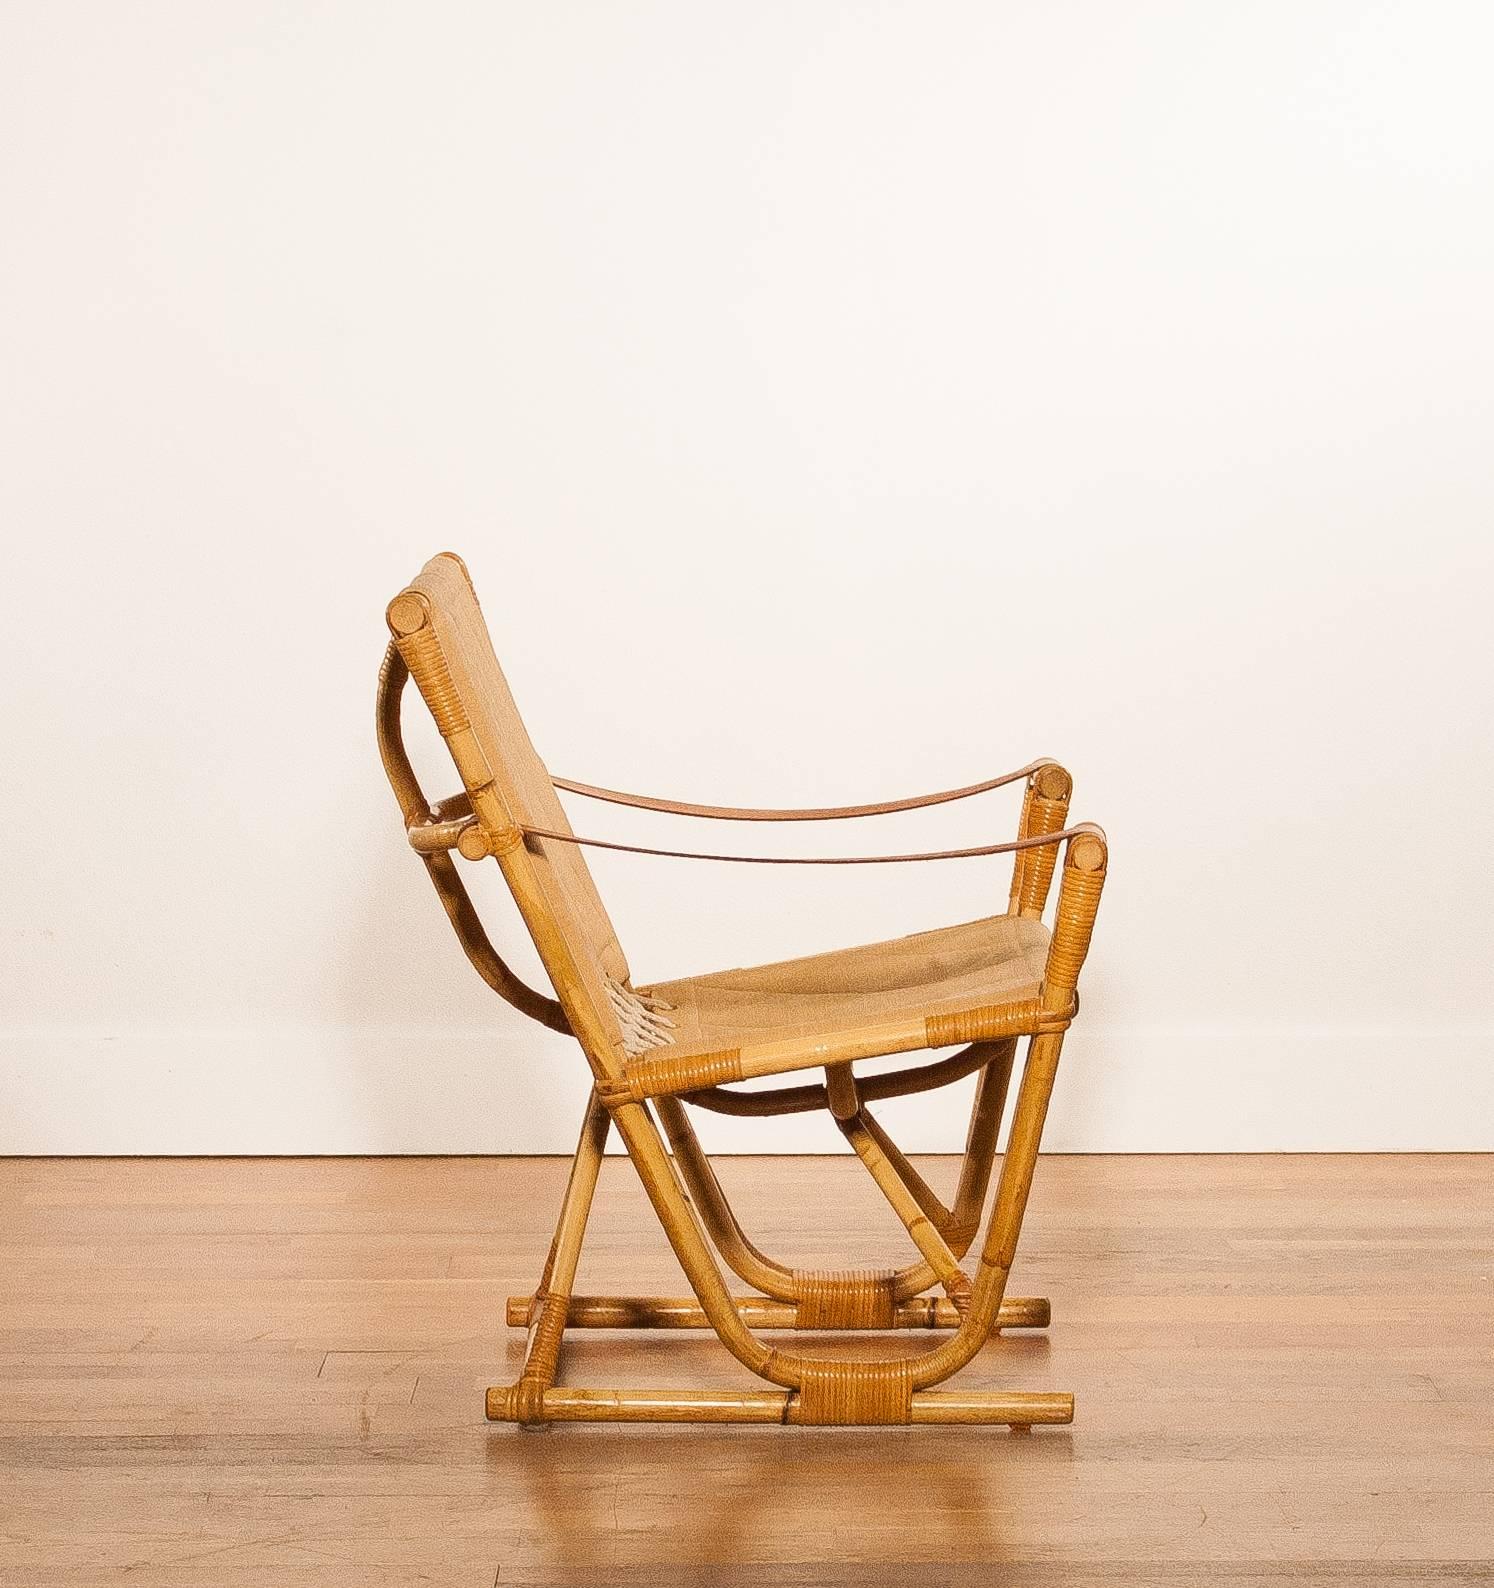 In absolute mint condition bamboo / rattan safari chair.

The linen / cotton upholstery and leather armrests are also in a perfect condition.

Period: 1950-1959.

The dimensions are:
74 cm. wide,
74 cm. height,
62 cm. depth,
seat height is